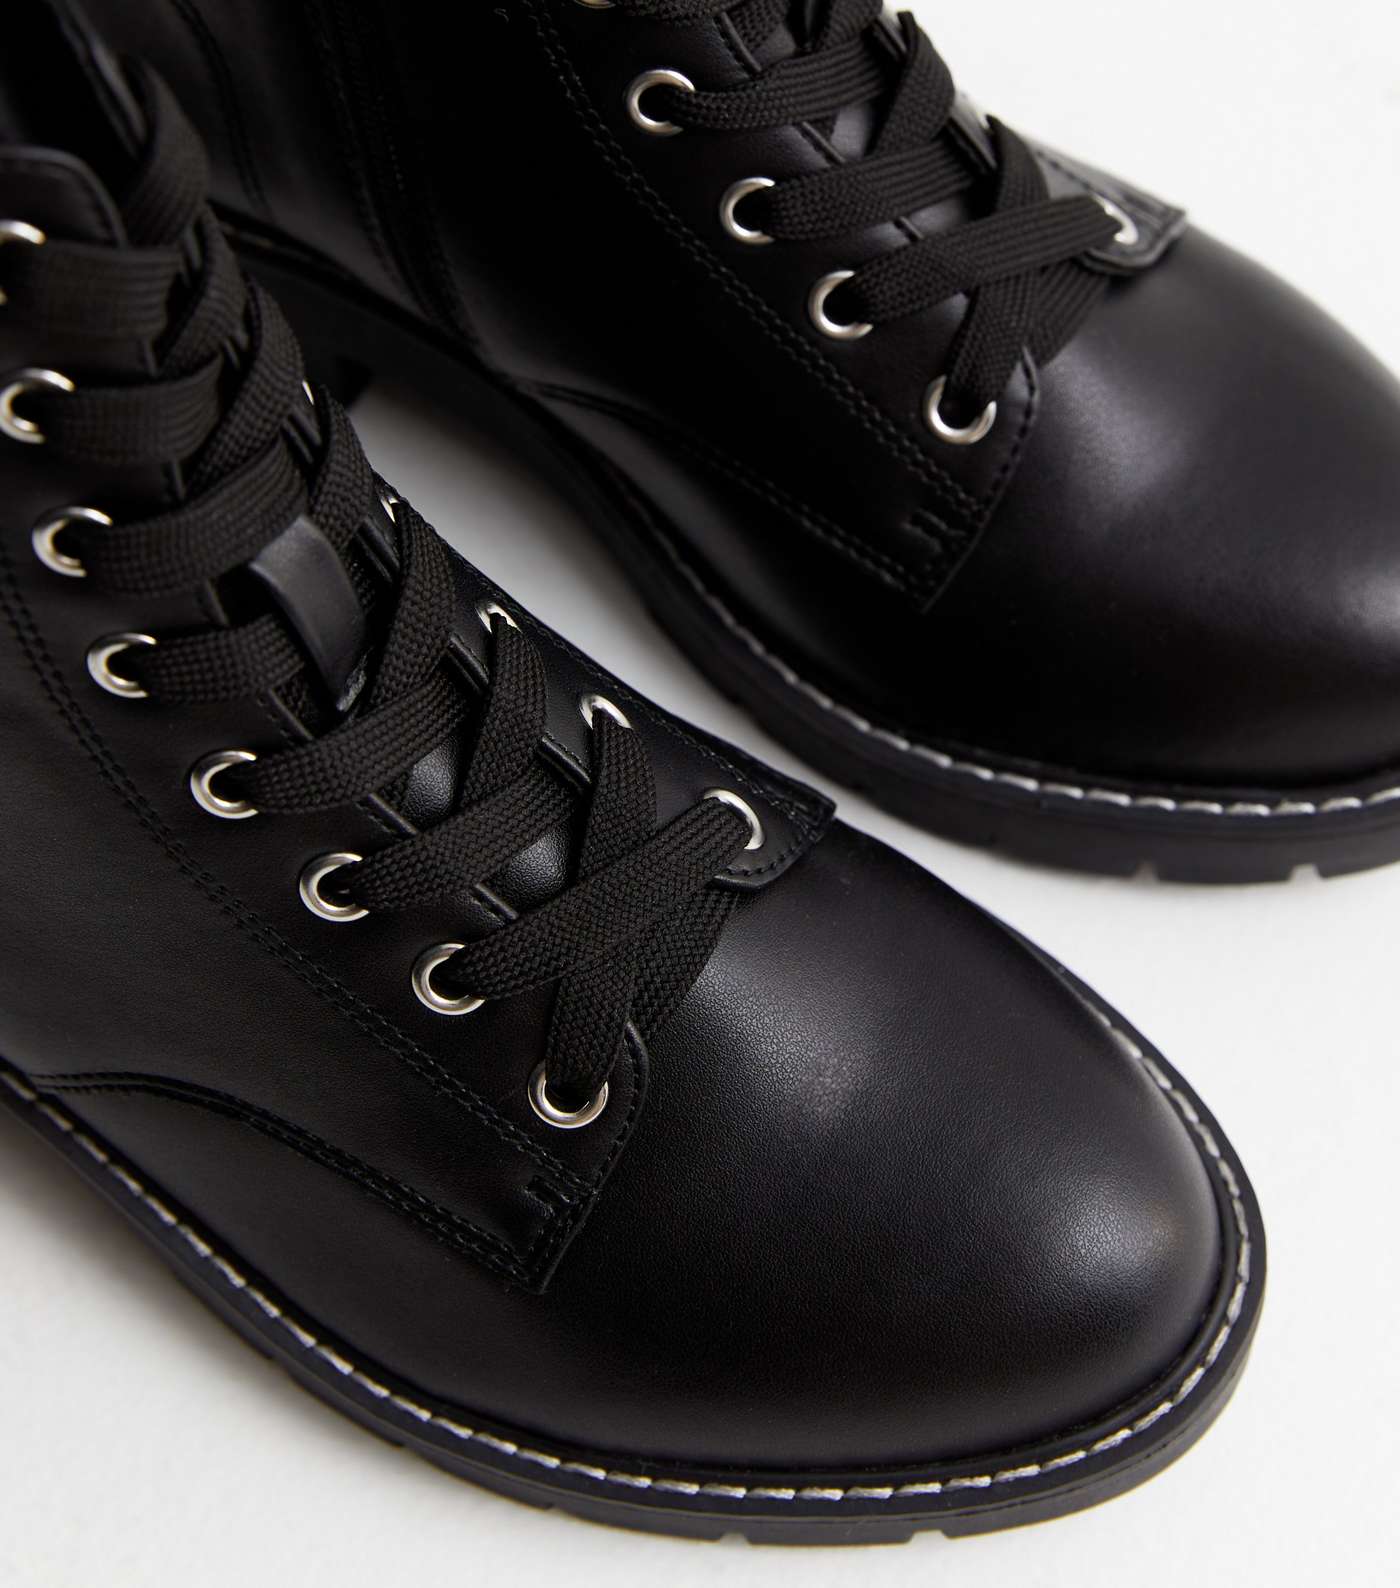 Wide Fit Black Leather-Look Contrast Stitch Lace Up Biker Boots Image 3